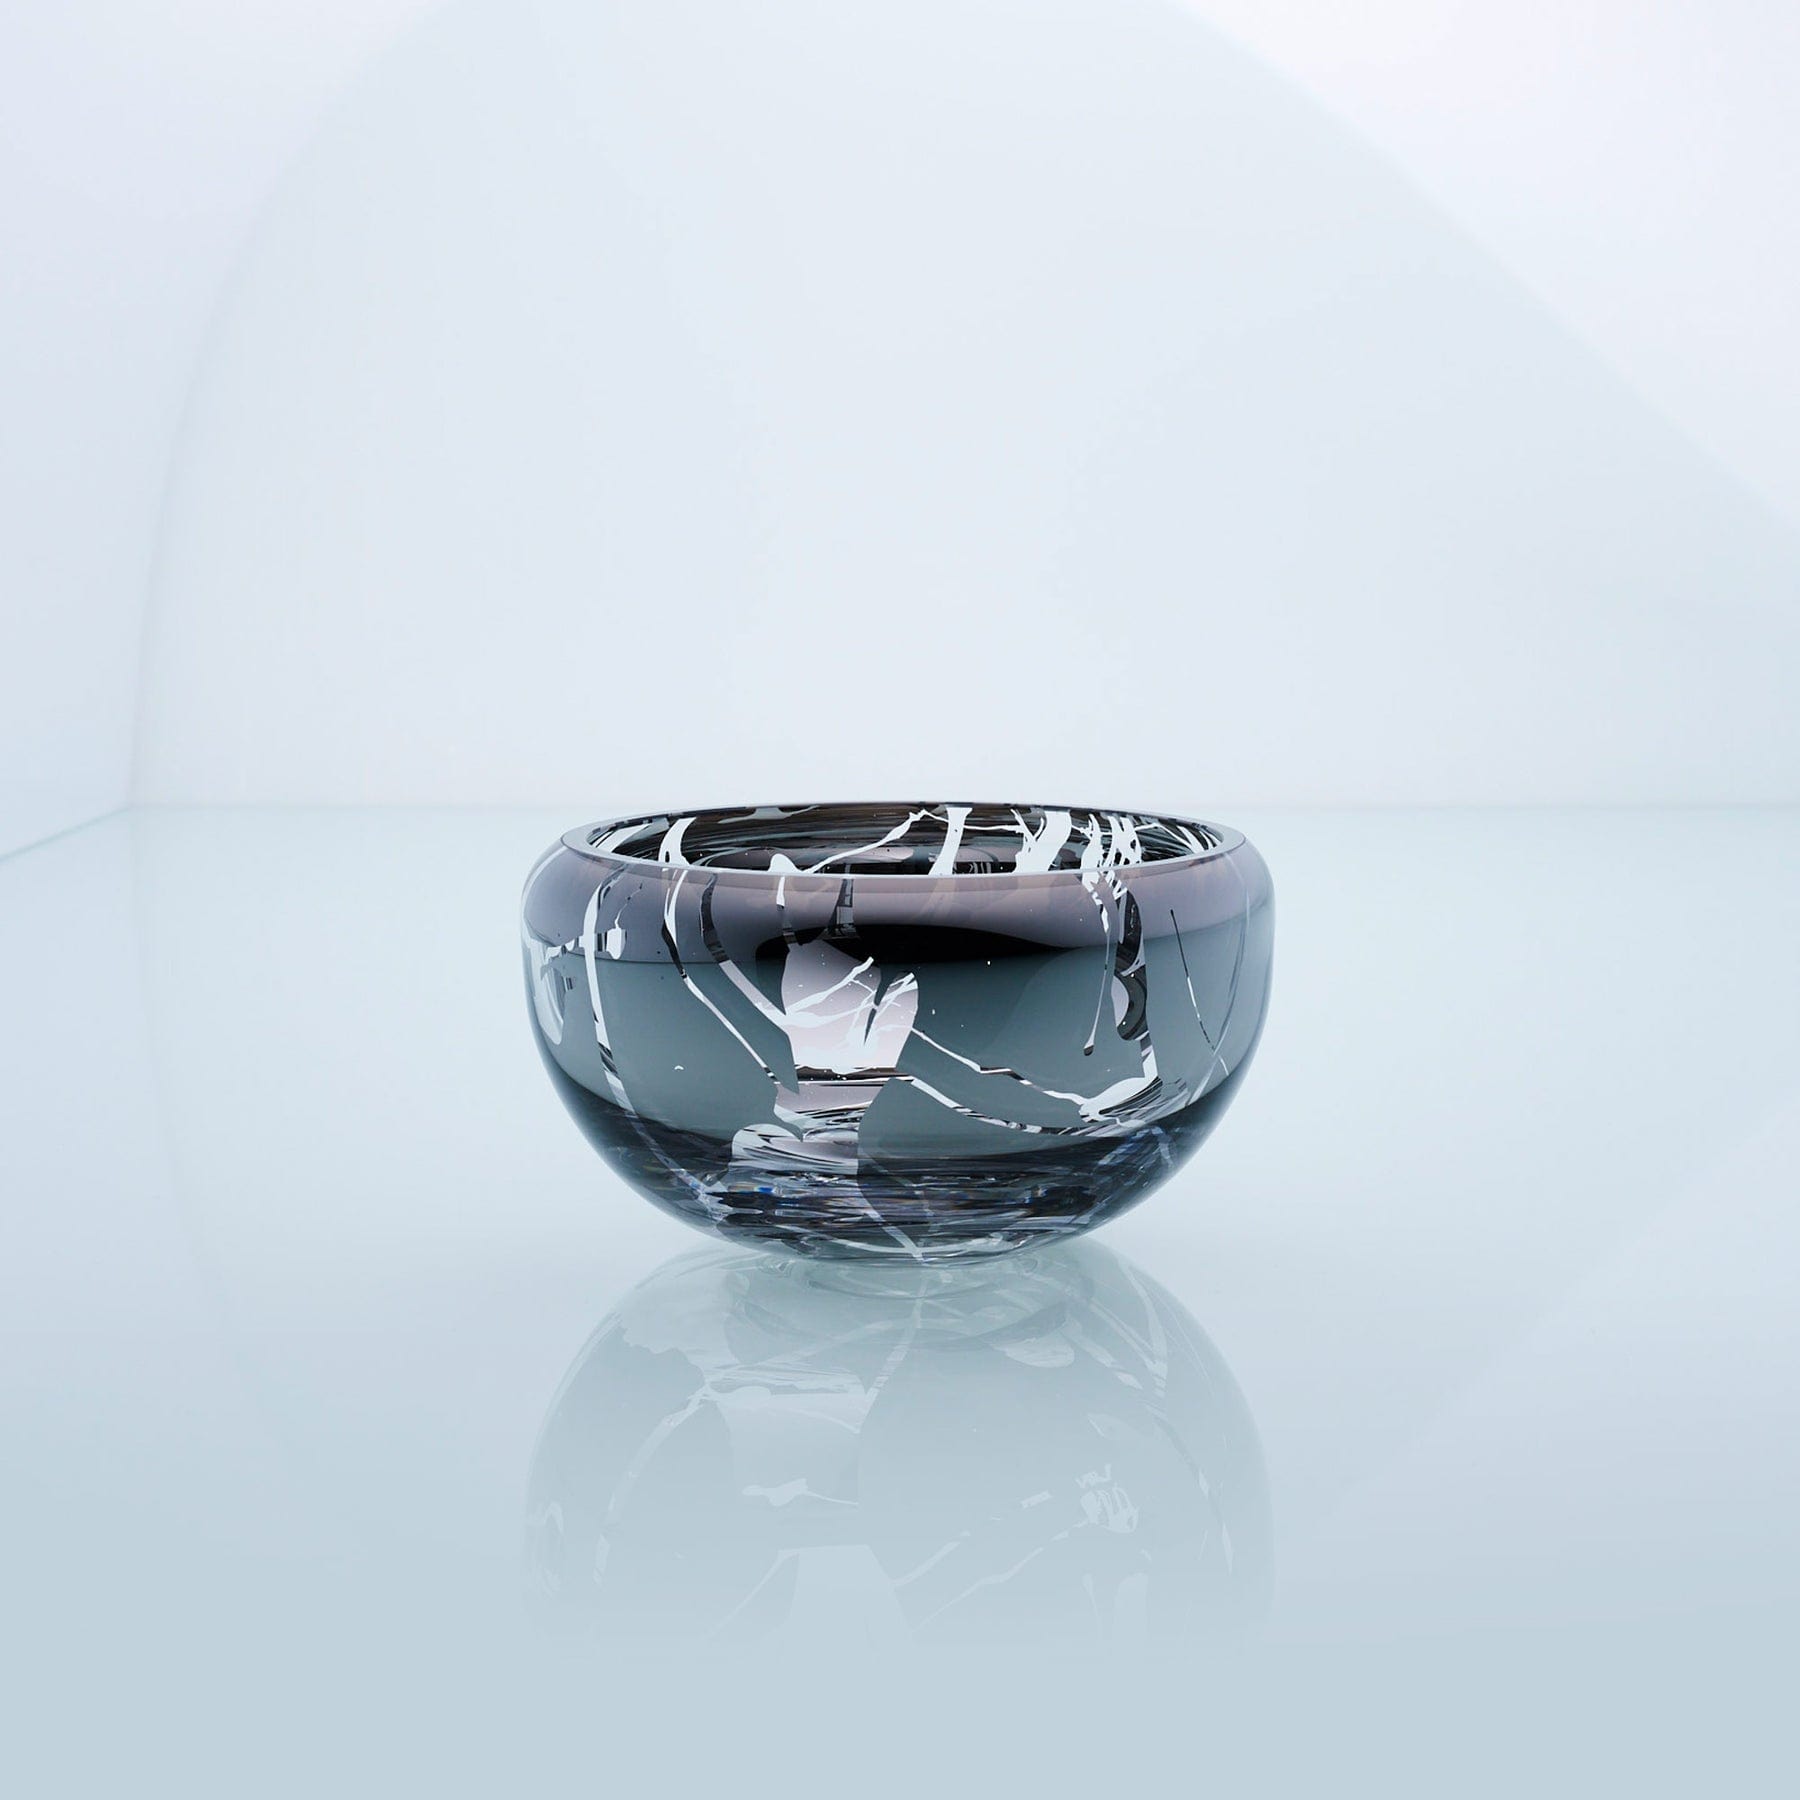 An & Angel, Small Round Glass Bowl, Mirror Ext. / Mirror Transparent Int.